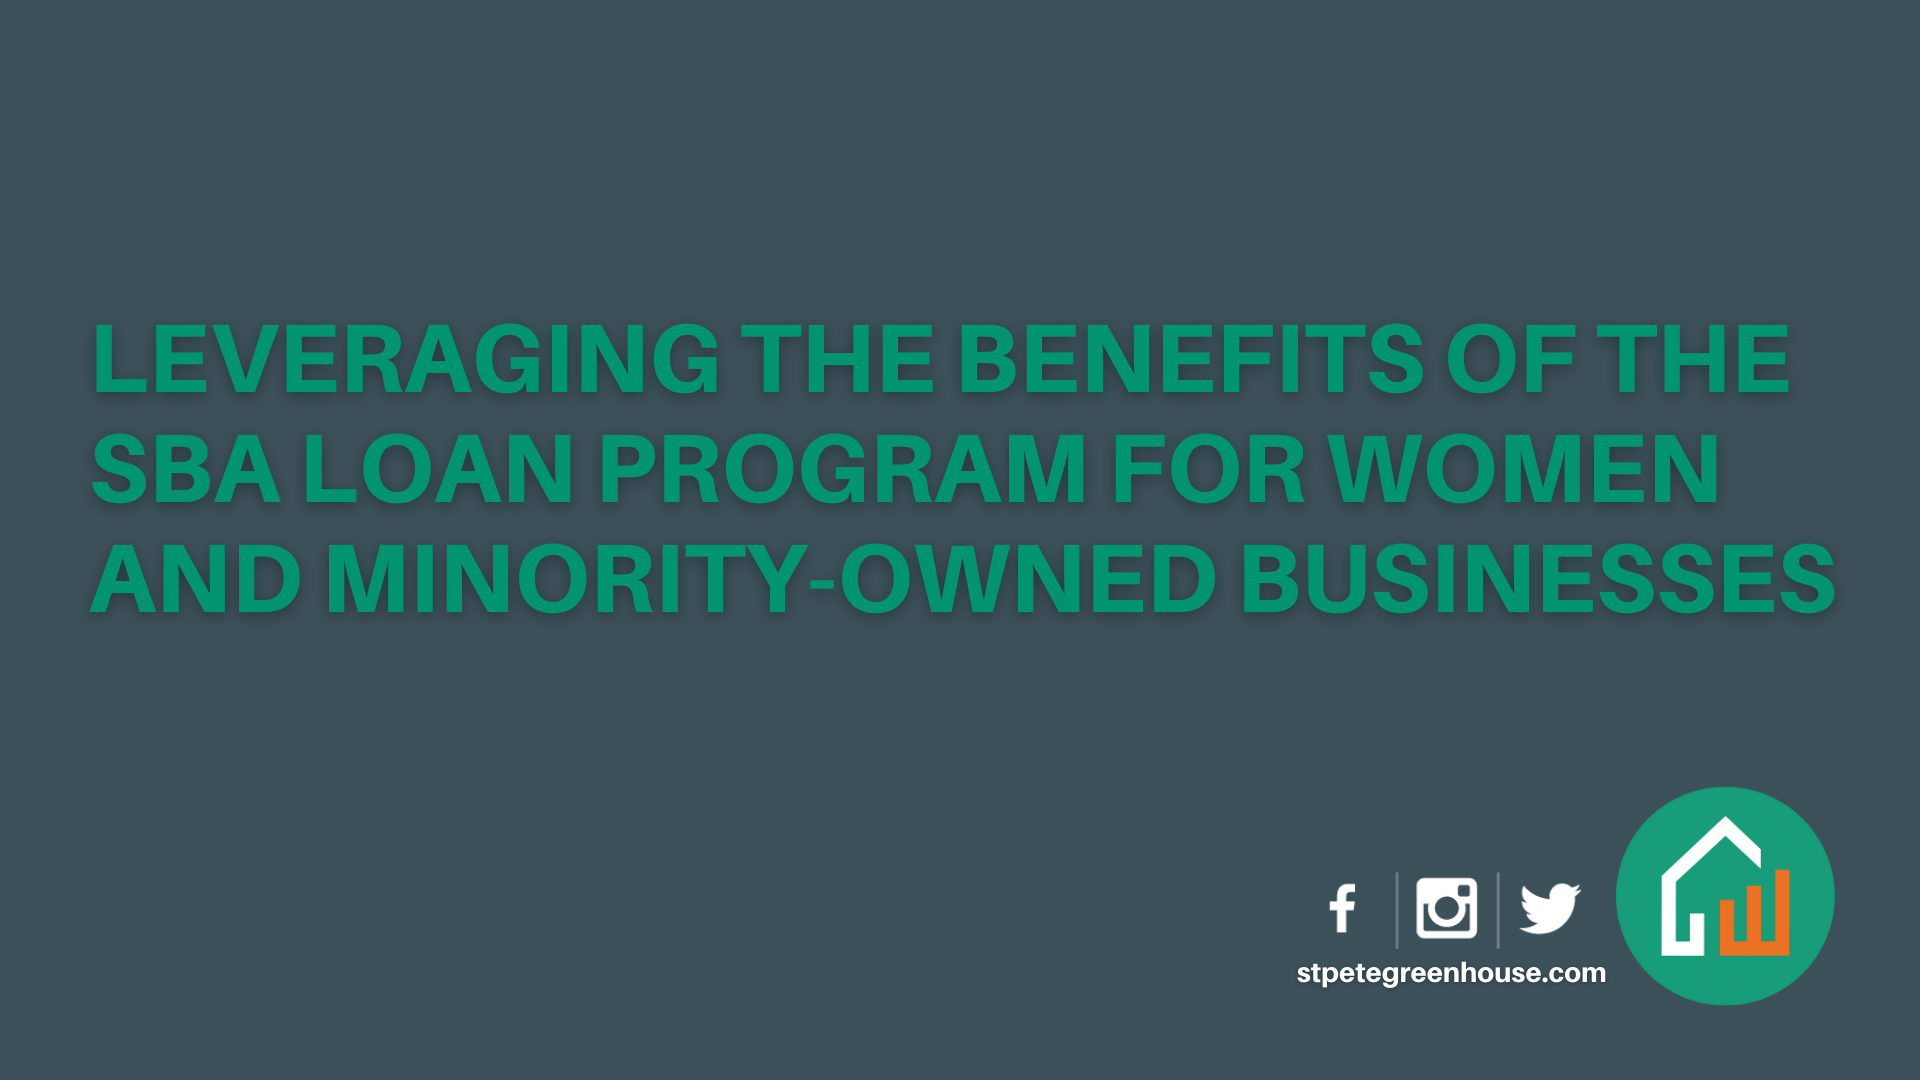 Leveraging the Benefits of the SBA Loan Program for Women and Minority-Owned Businesses-image